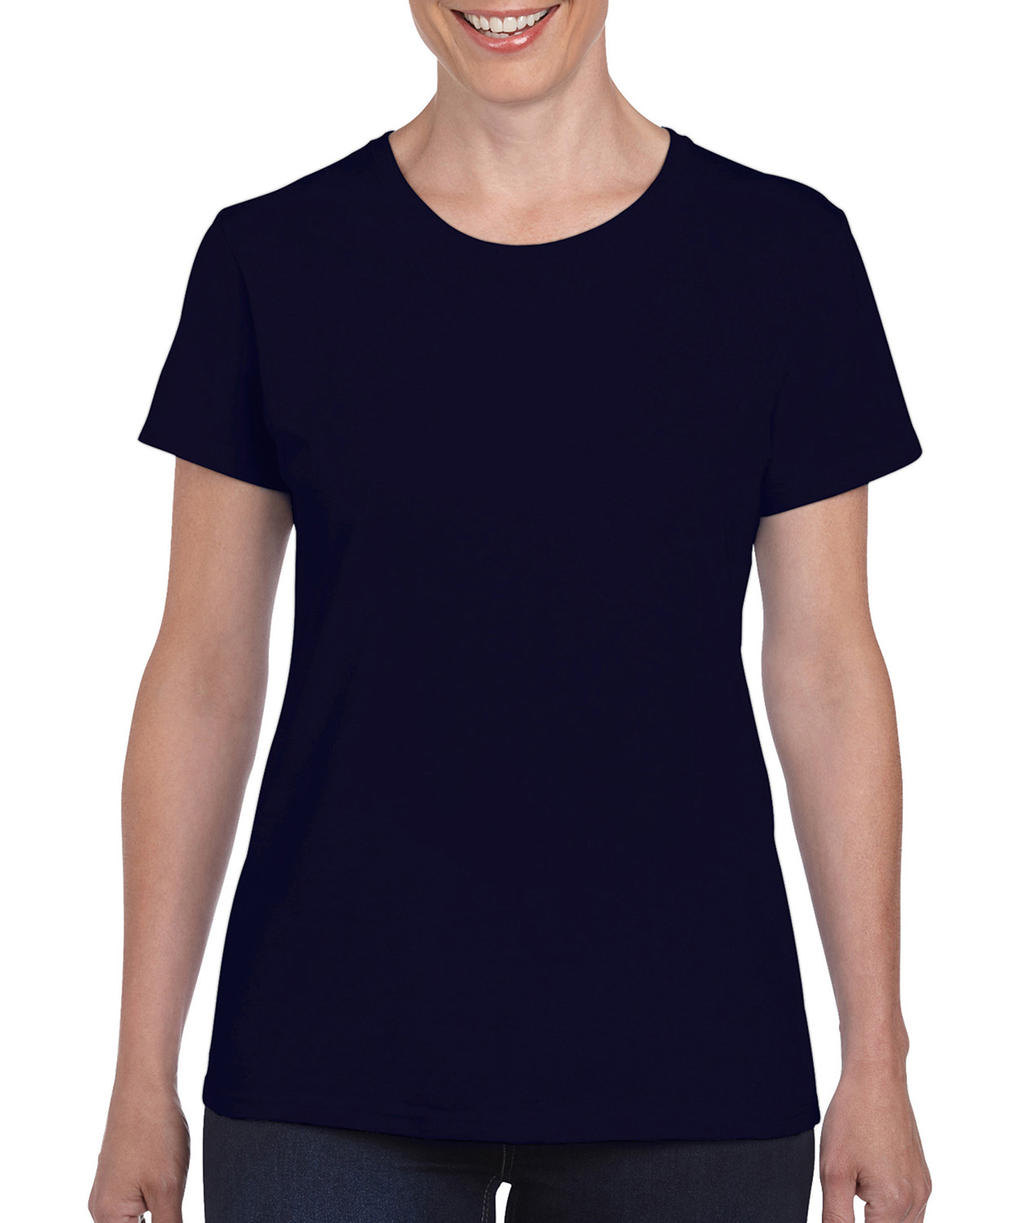  Ladies Heavy Cotton T-Shirt in Farbe Navy